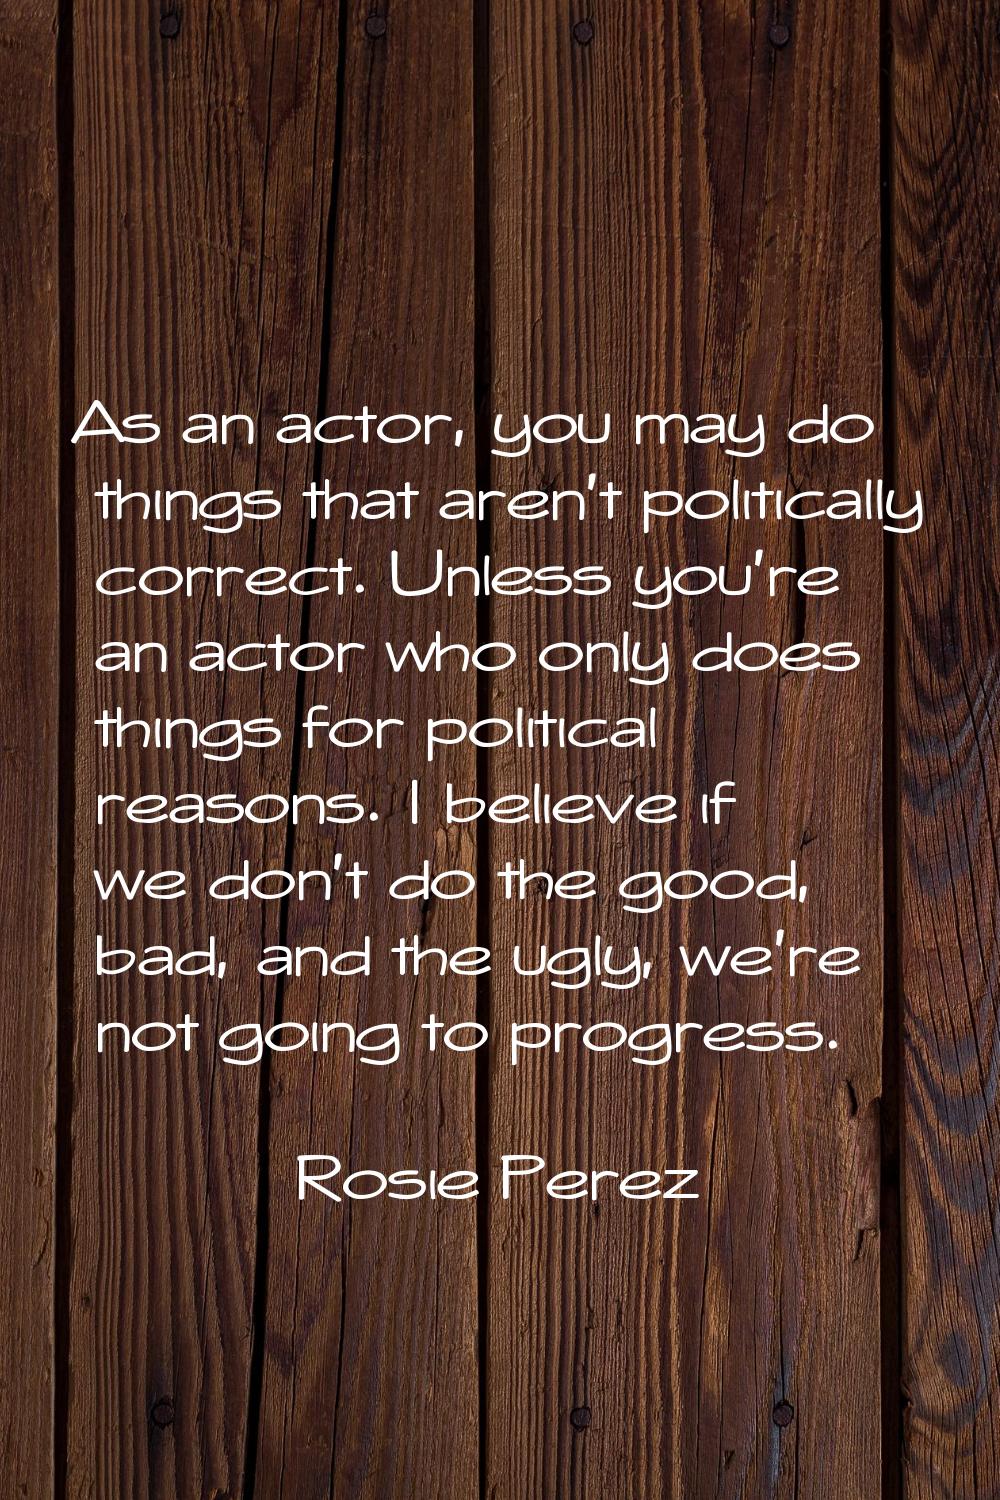 As an actor, you may do things that aren't politically correct. Unless you're an actor who only doe